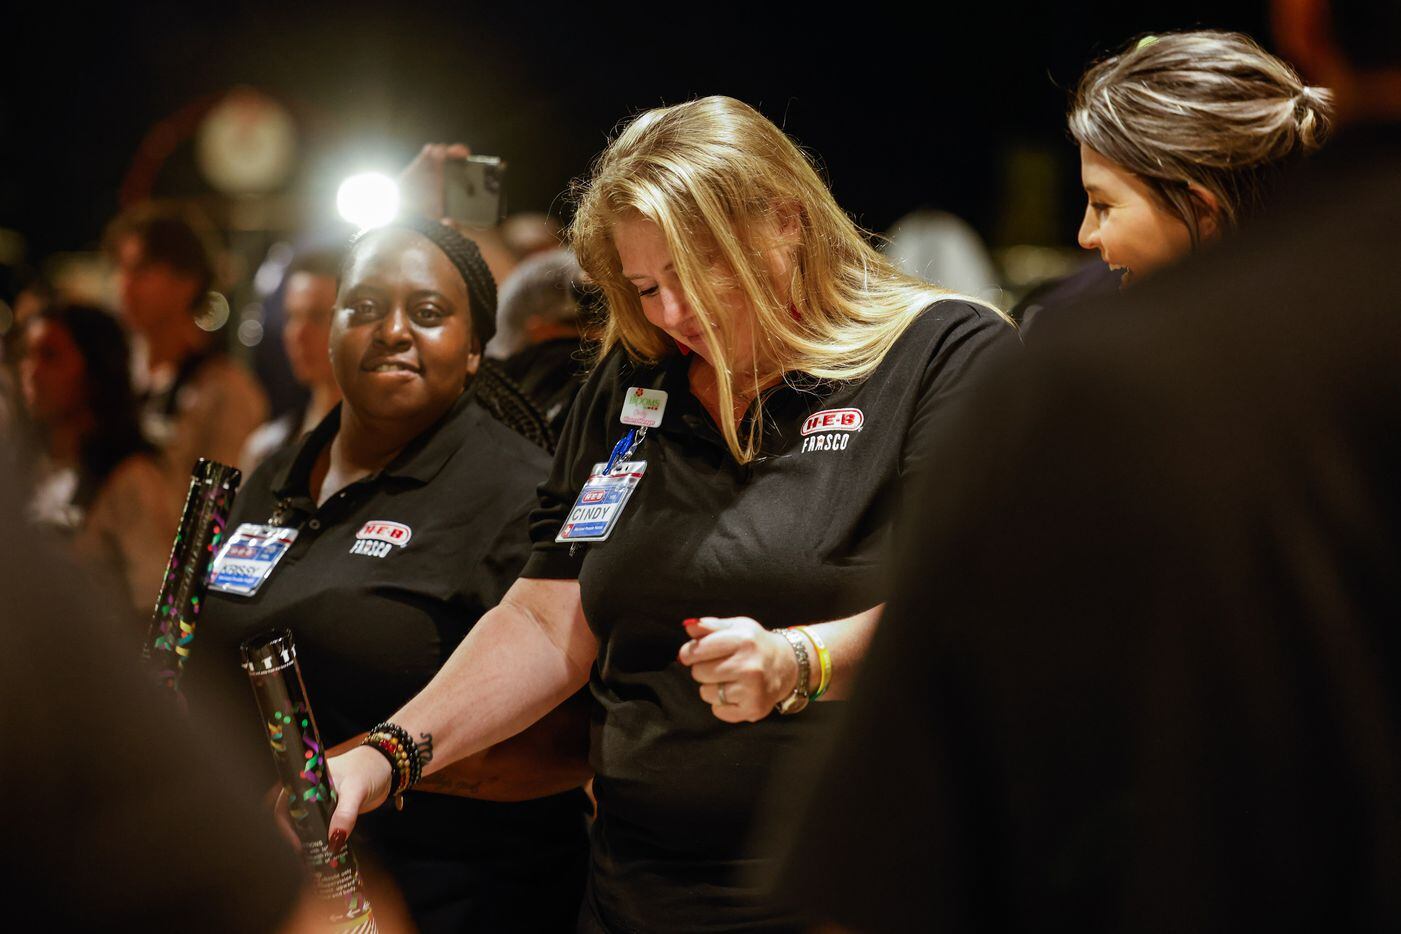 H-E-B worker Cindy Flach, left, dance next to they coworker Krissy Crump as they prepare to...